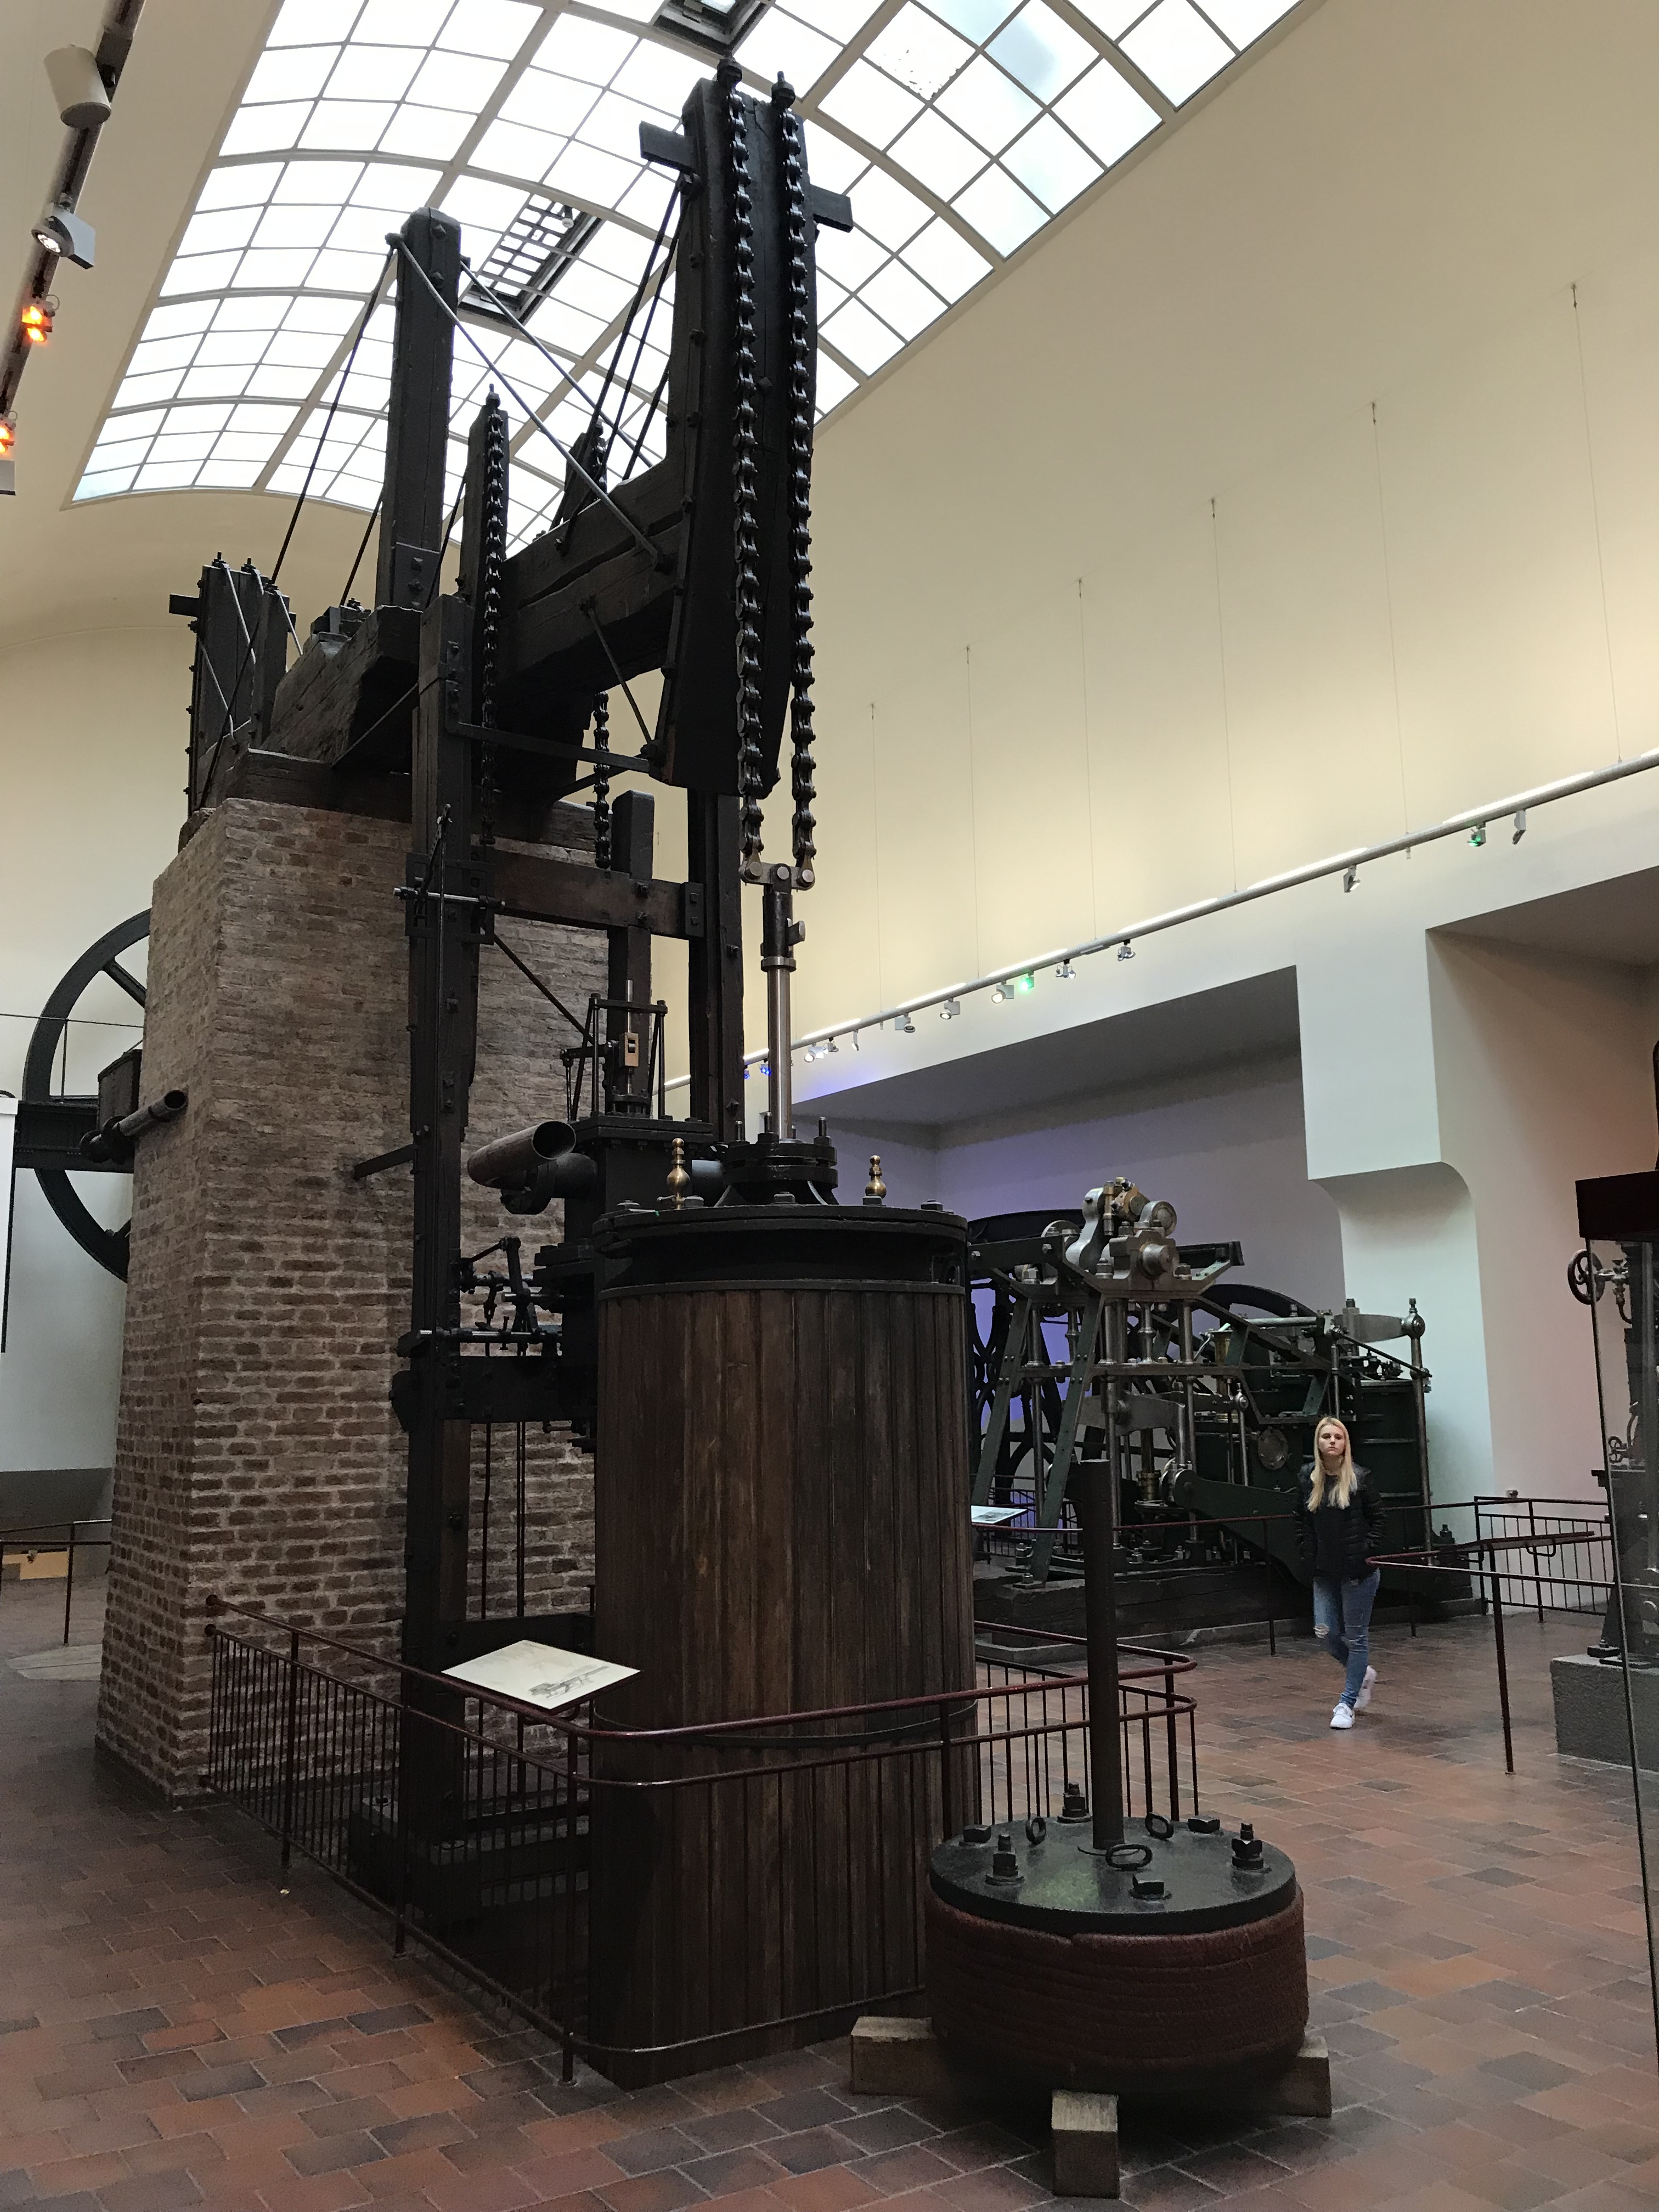 Steam Powered Water Pump from ~1850